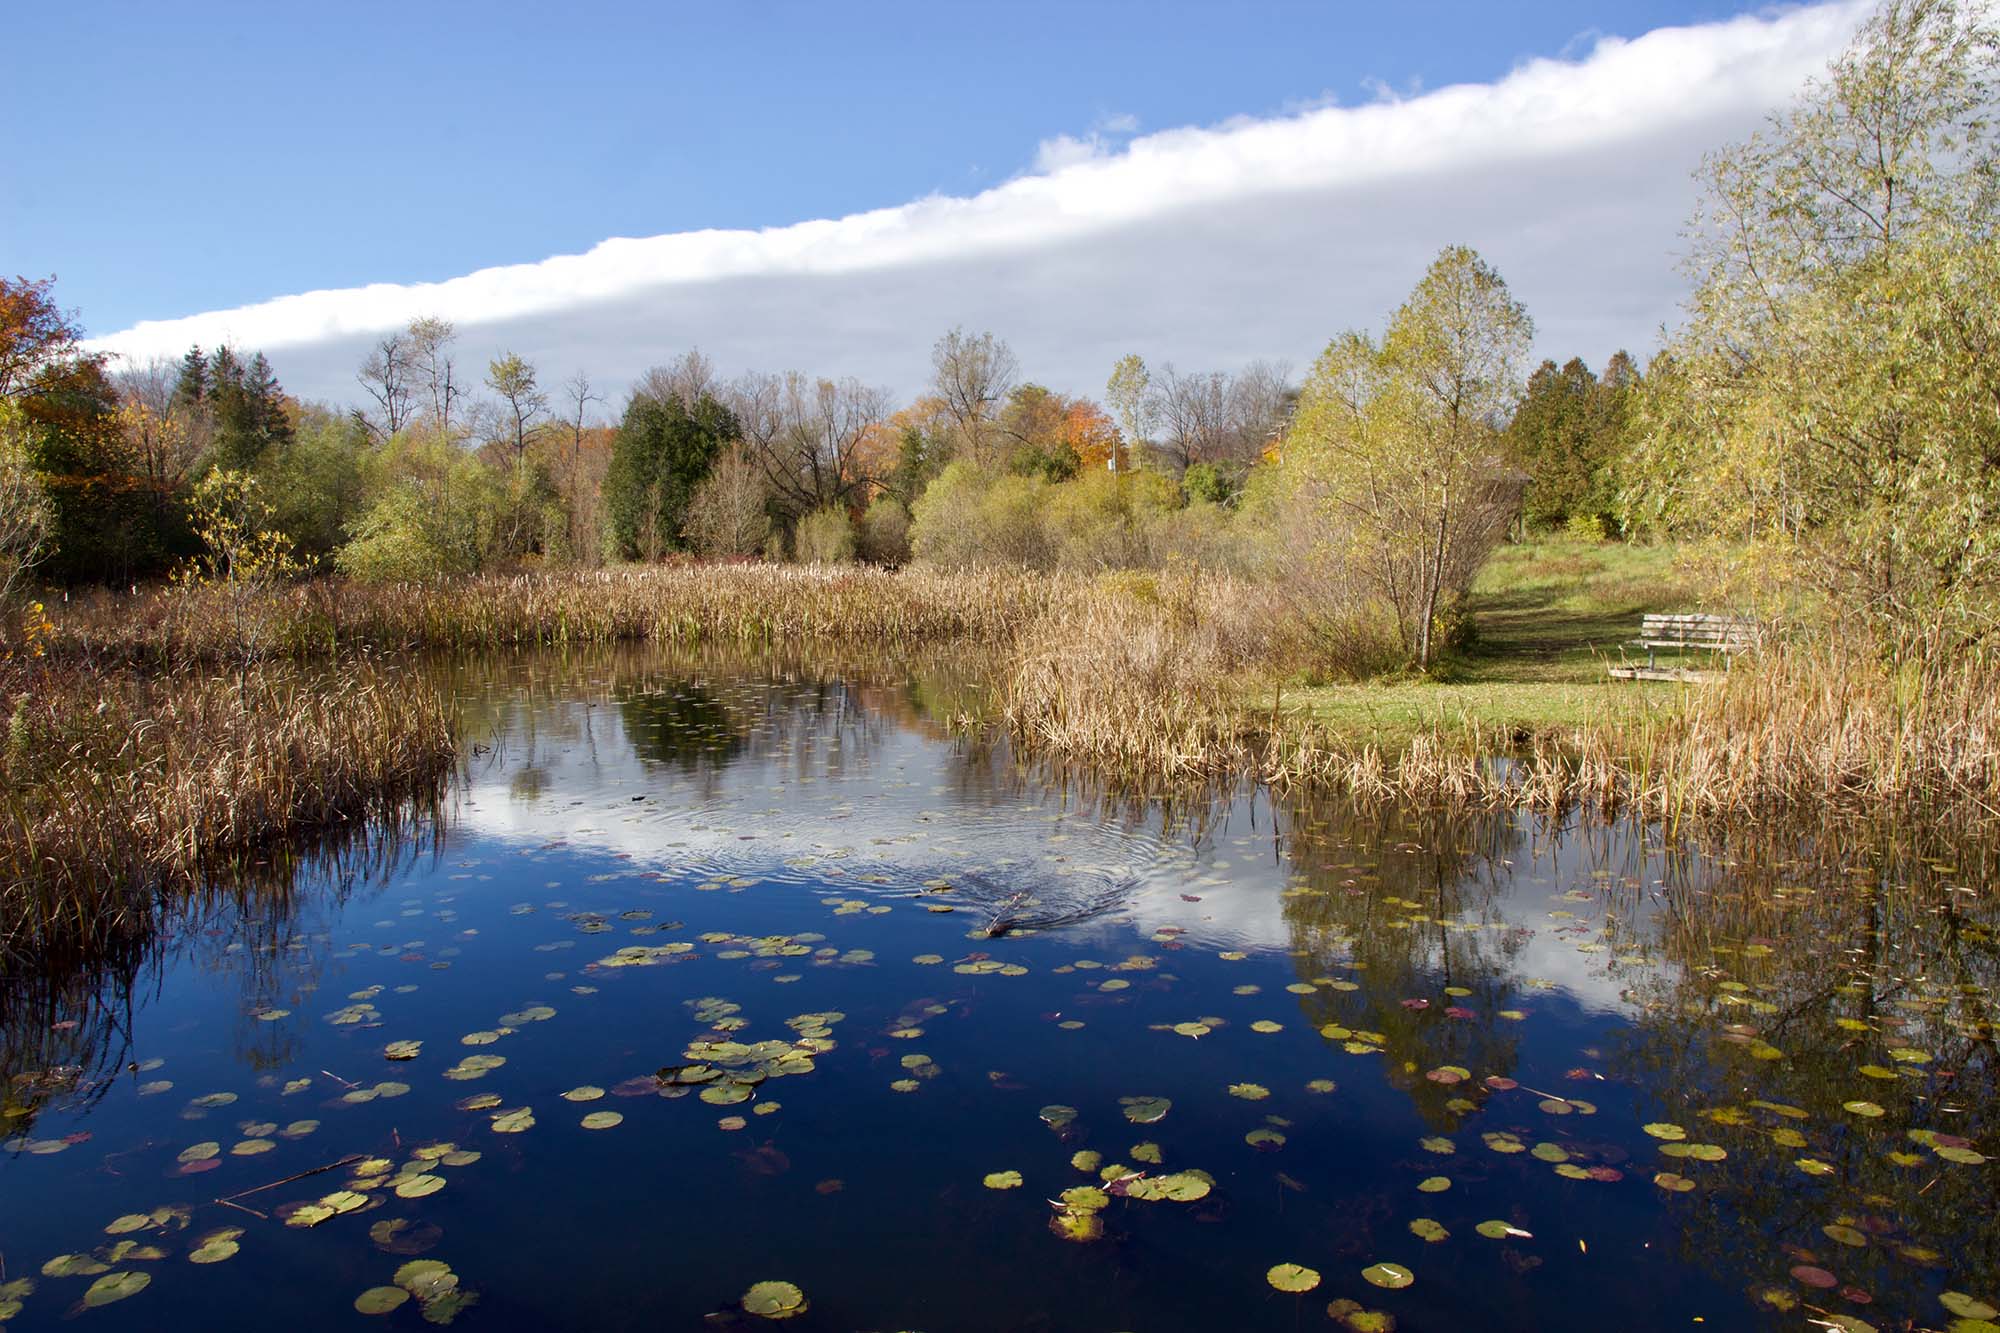 On a sunny fall day, a muskrat swims across a pond covered in lily pads